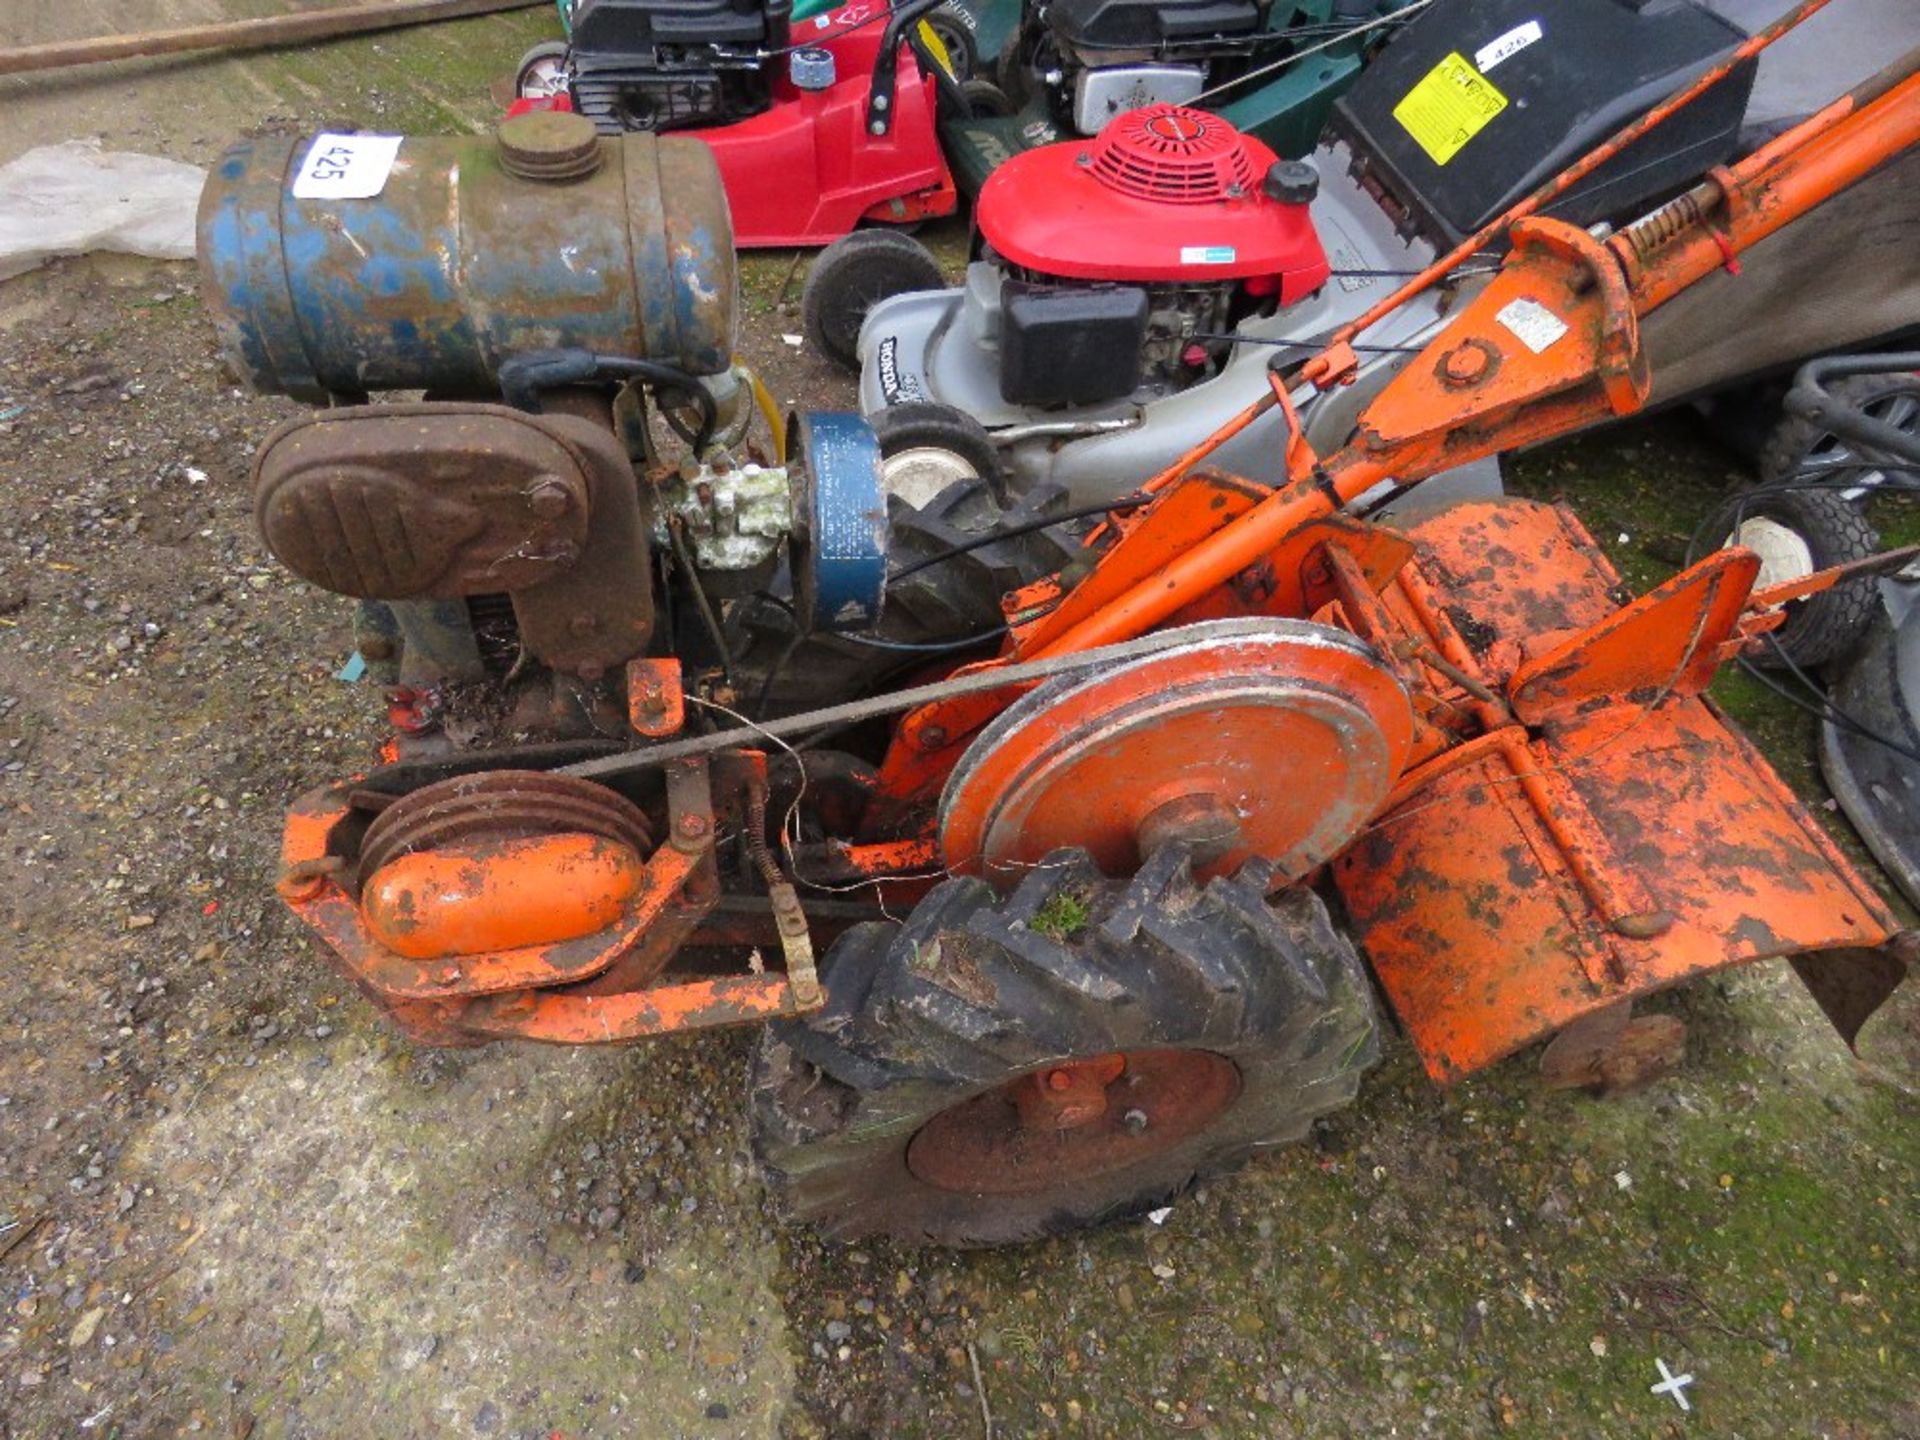 HOWARD 300 PETROL ROTORVATOR PLUS A MOUNTFIELD CHASSIS....THIS LOT IS SOLD UNDER THE AUCTIONEERS MAR - Bild 5 aus 8